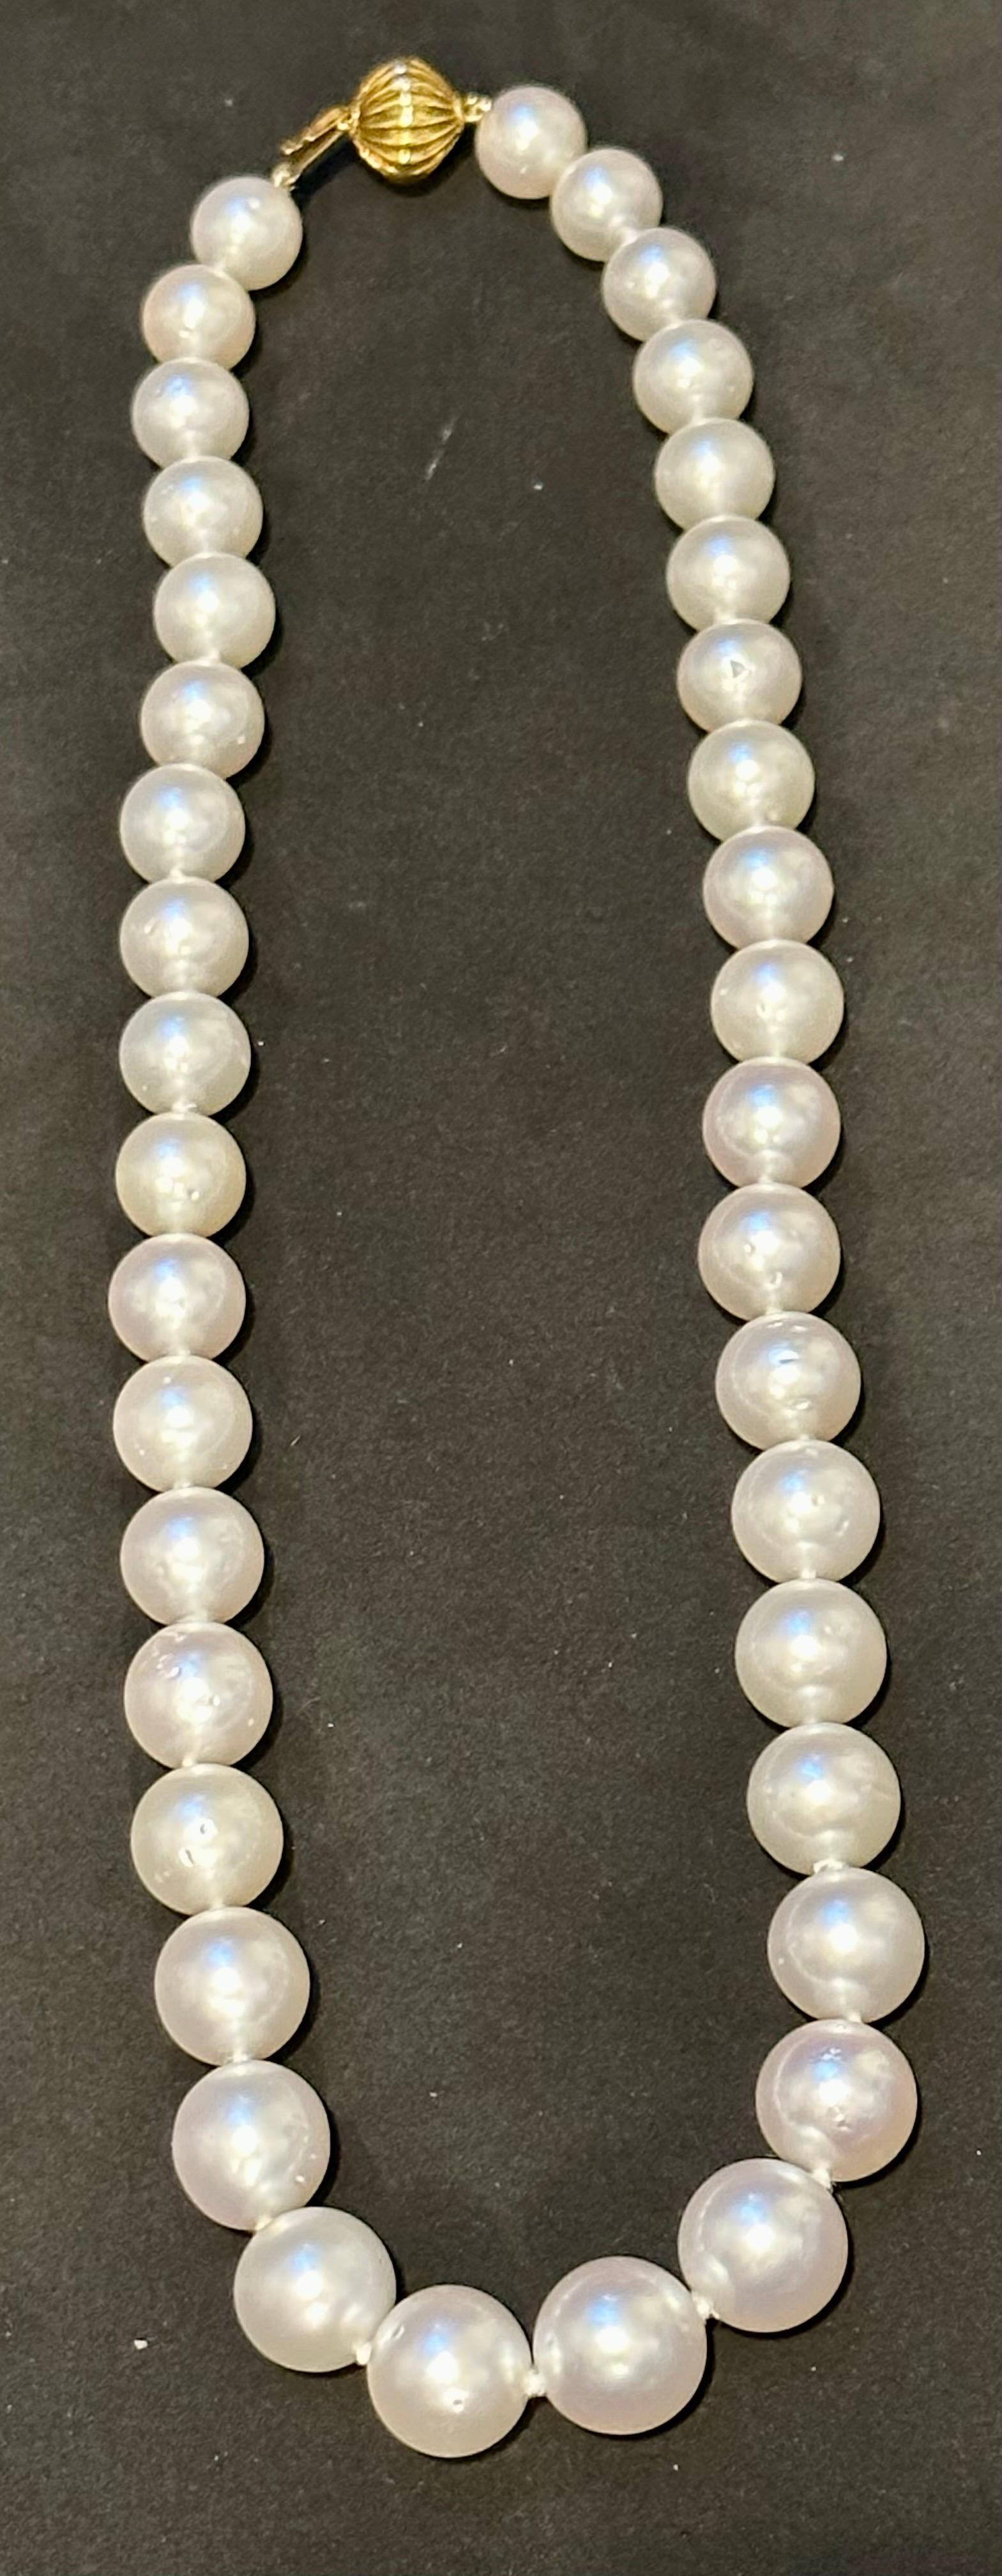 Round Cut Graduating White South Sea Pearls 9-12mm Strand Necklace 14 Kt Yellow Gold Clasp For Sale